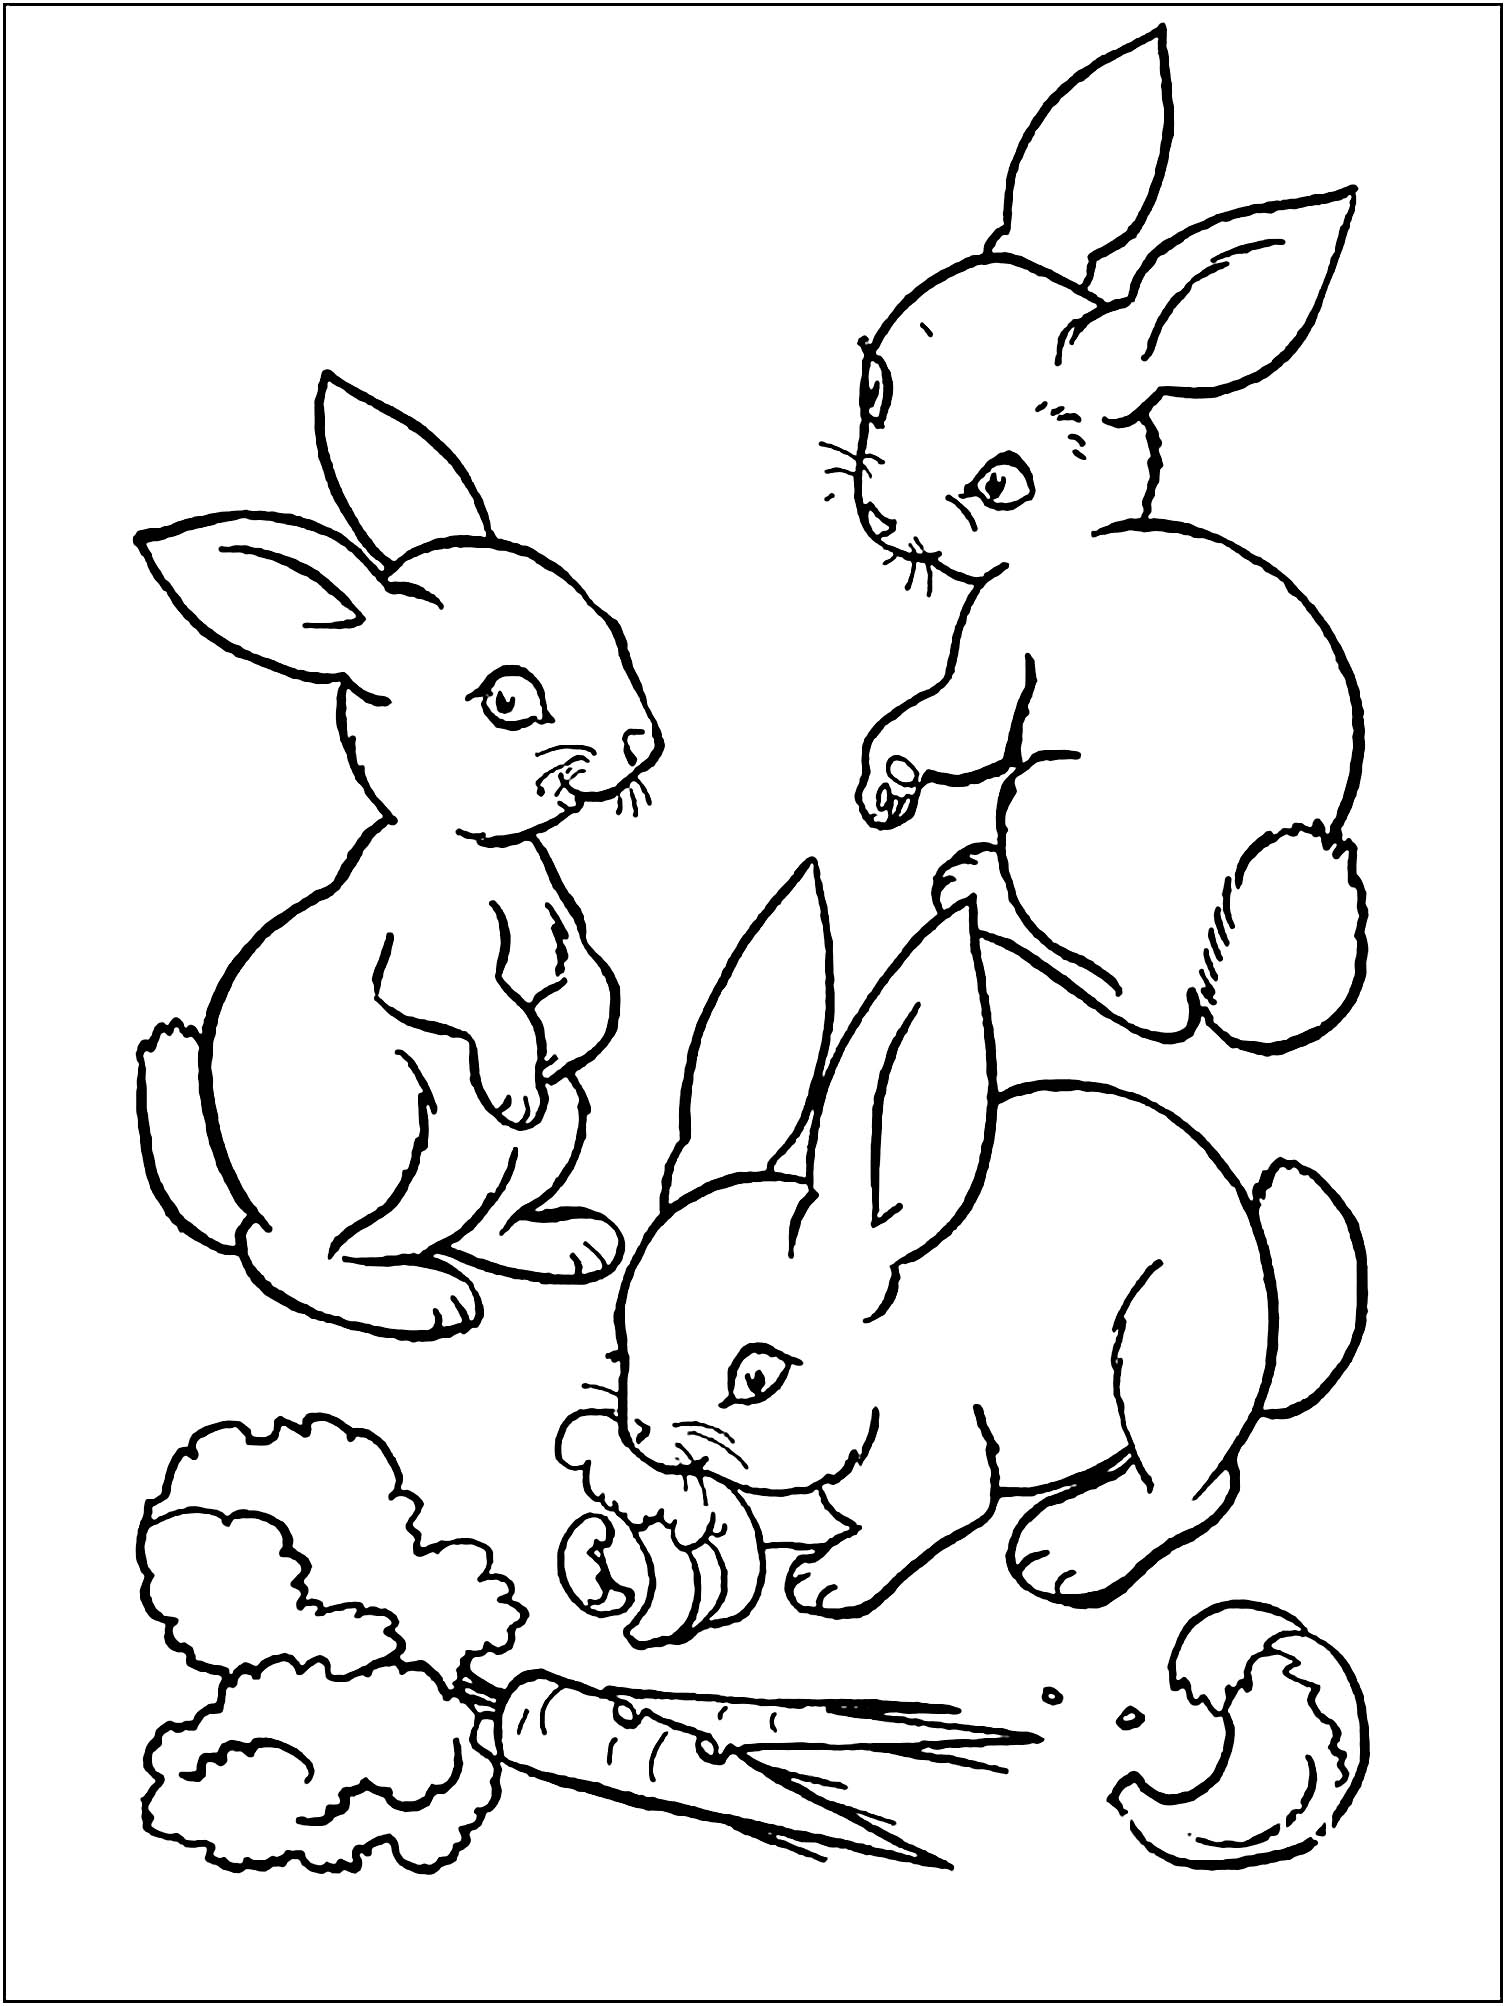 Rabbit to print for free - Rabbit Kids Coloring Pages